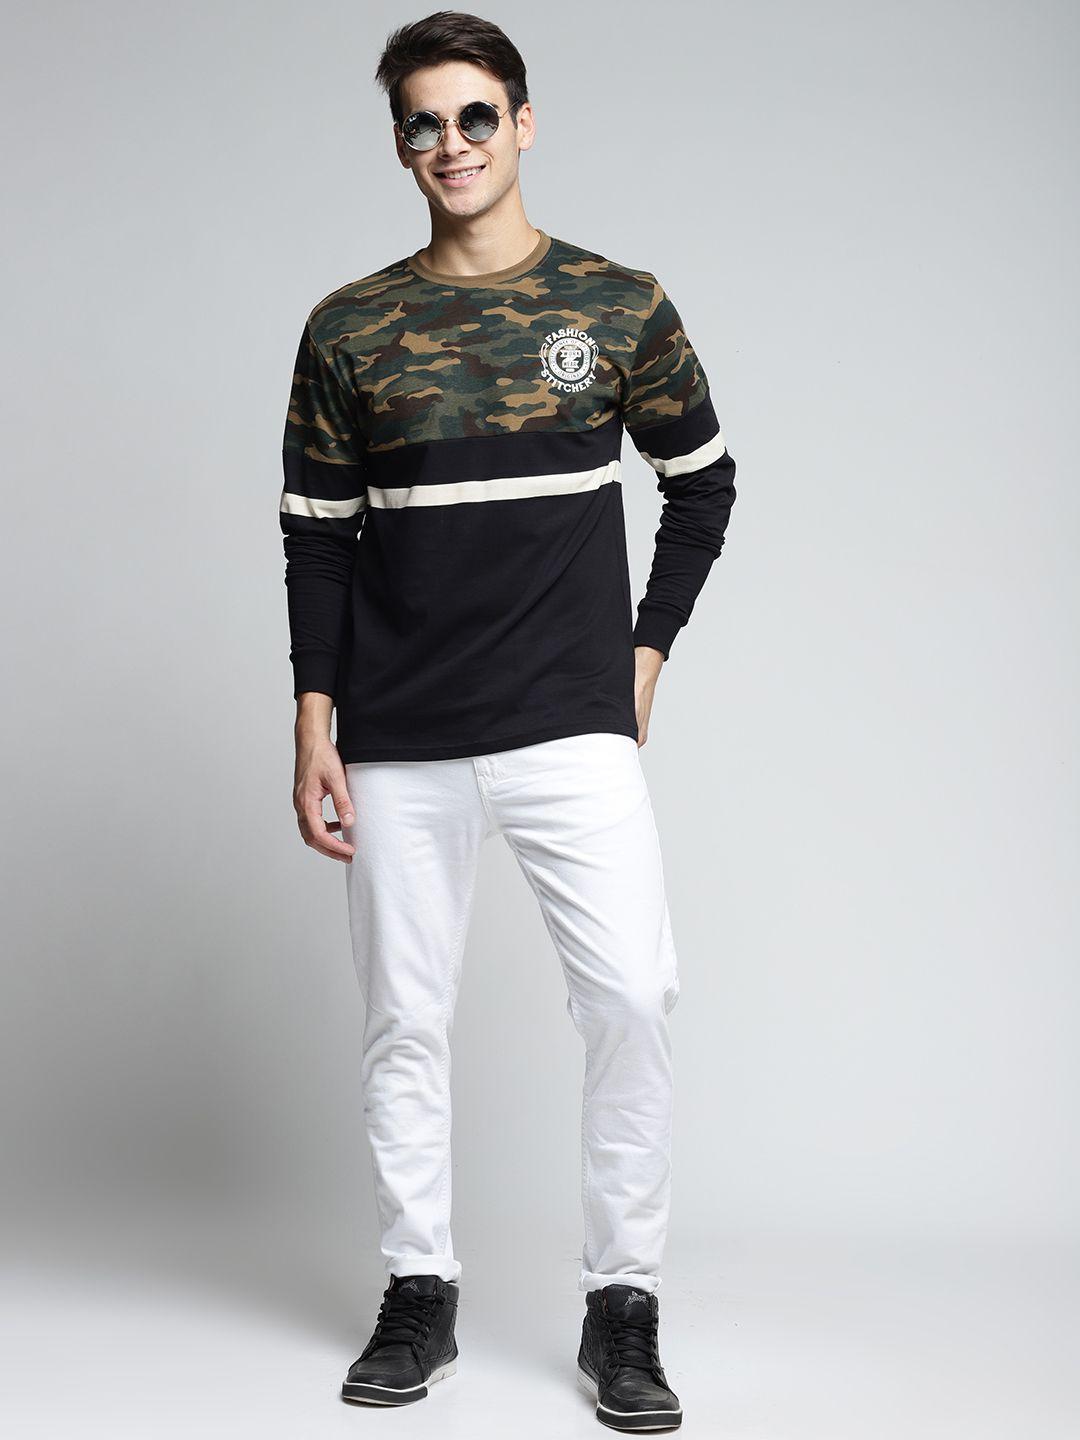 difference-of-opinion-men-khaki-&-black-printed-round-neck-t-shirt